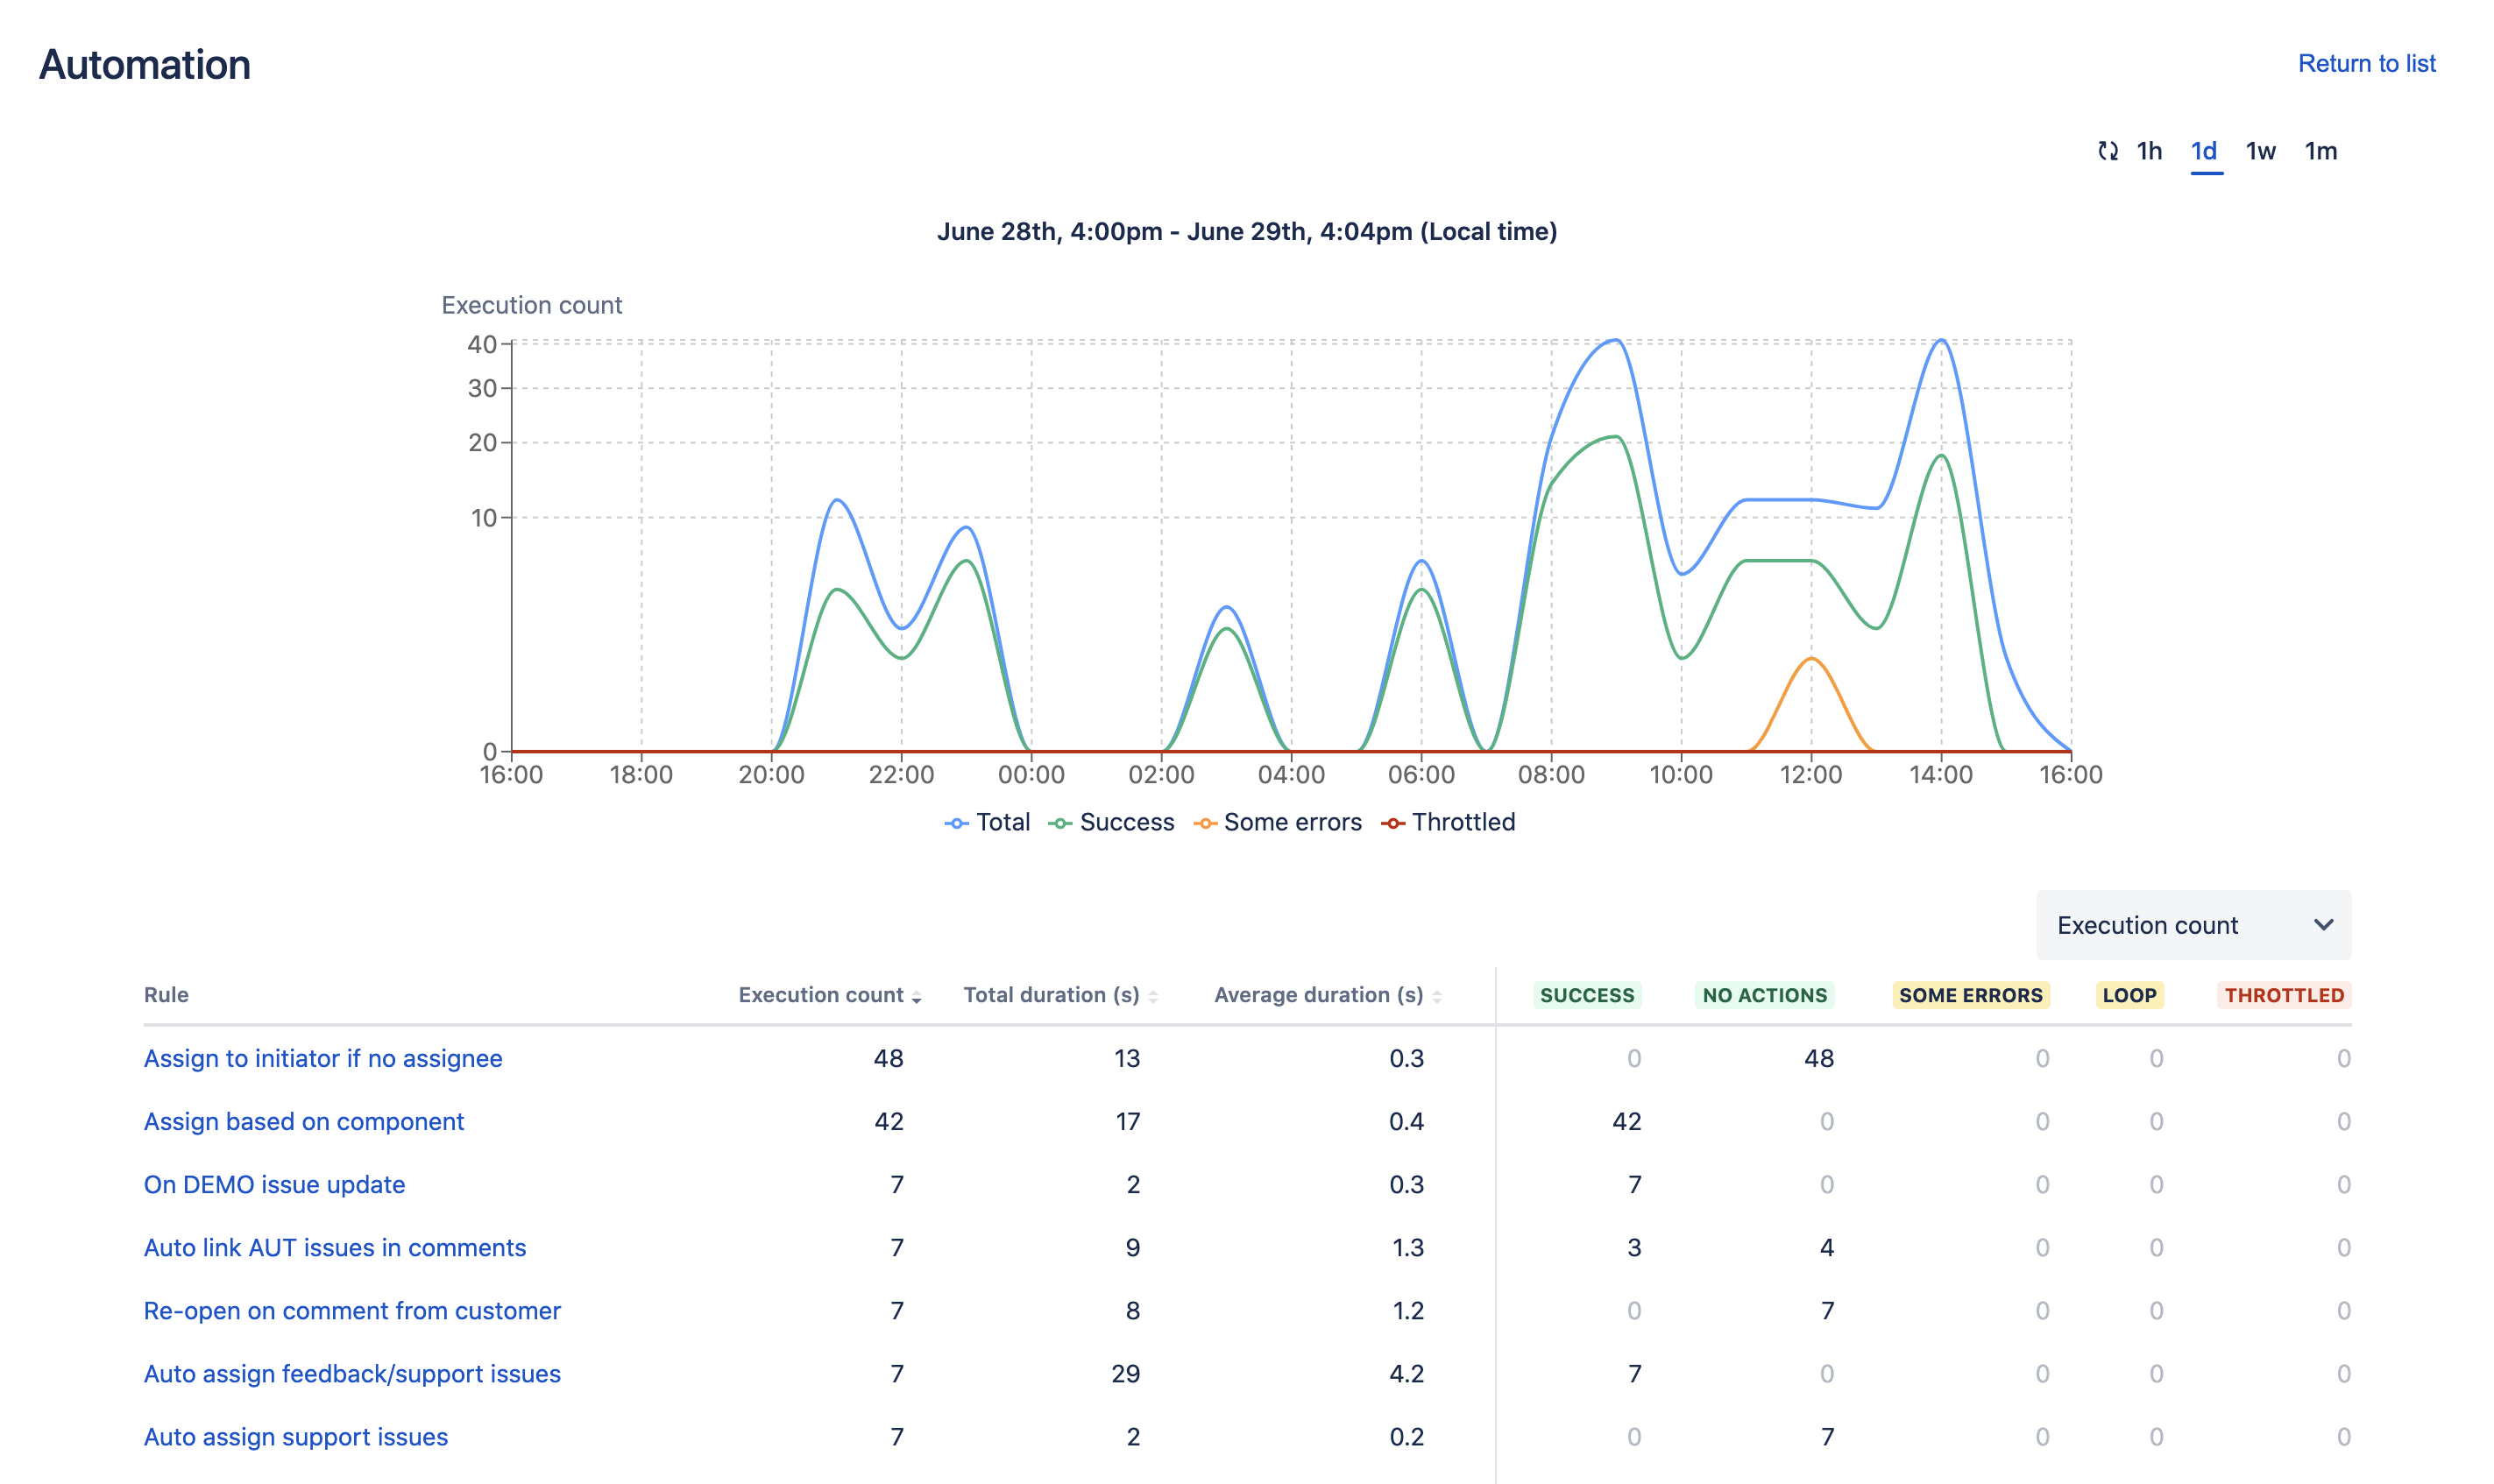 "Performance insights" screen in Jira automation, depicting a table that shows rules, execution count, and statuses.